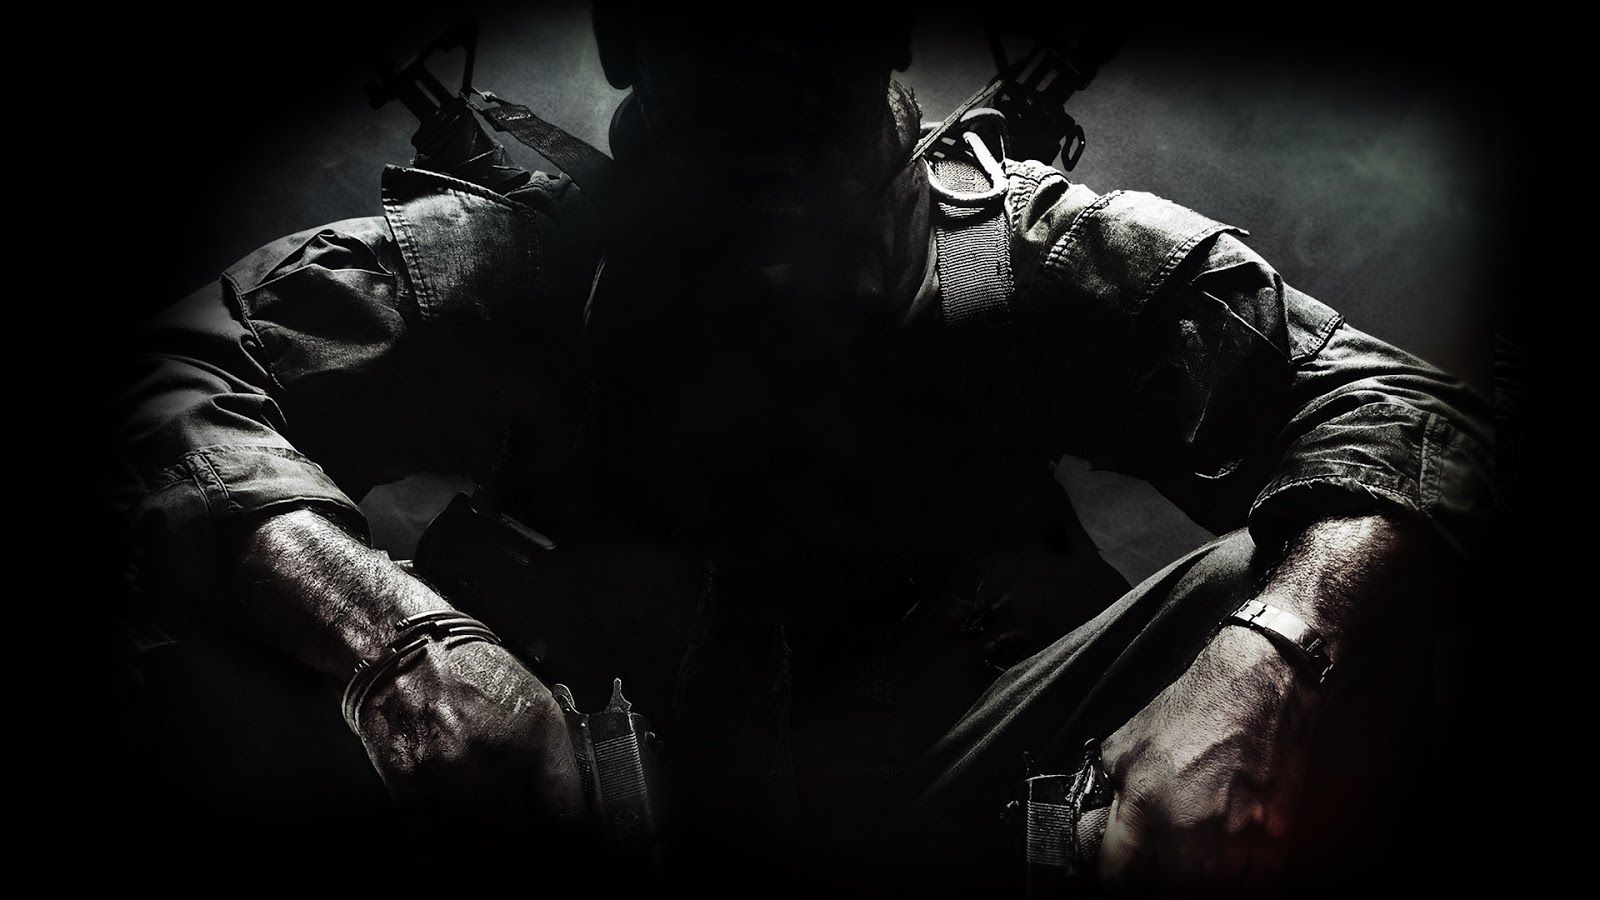 Games Background In High Quality: Call Of Duty Black Ops 2